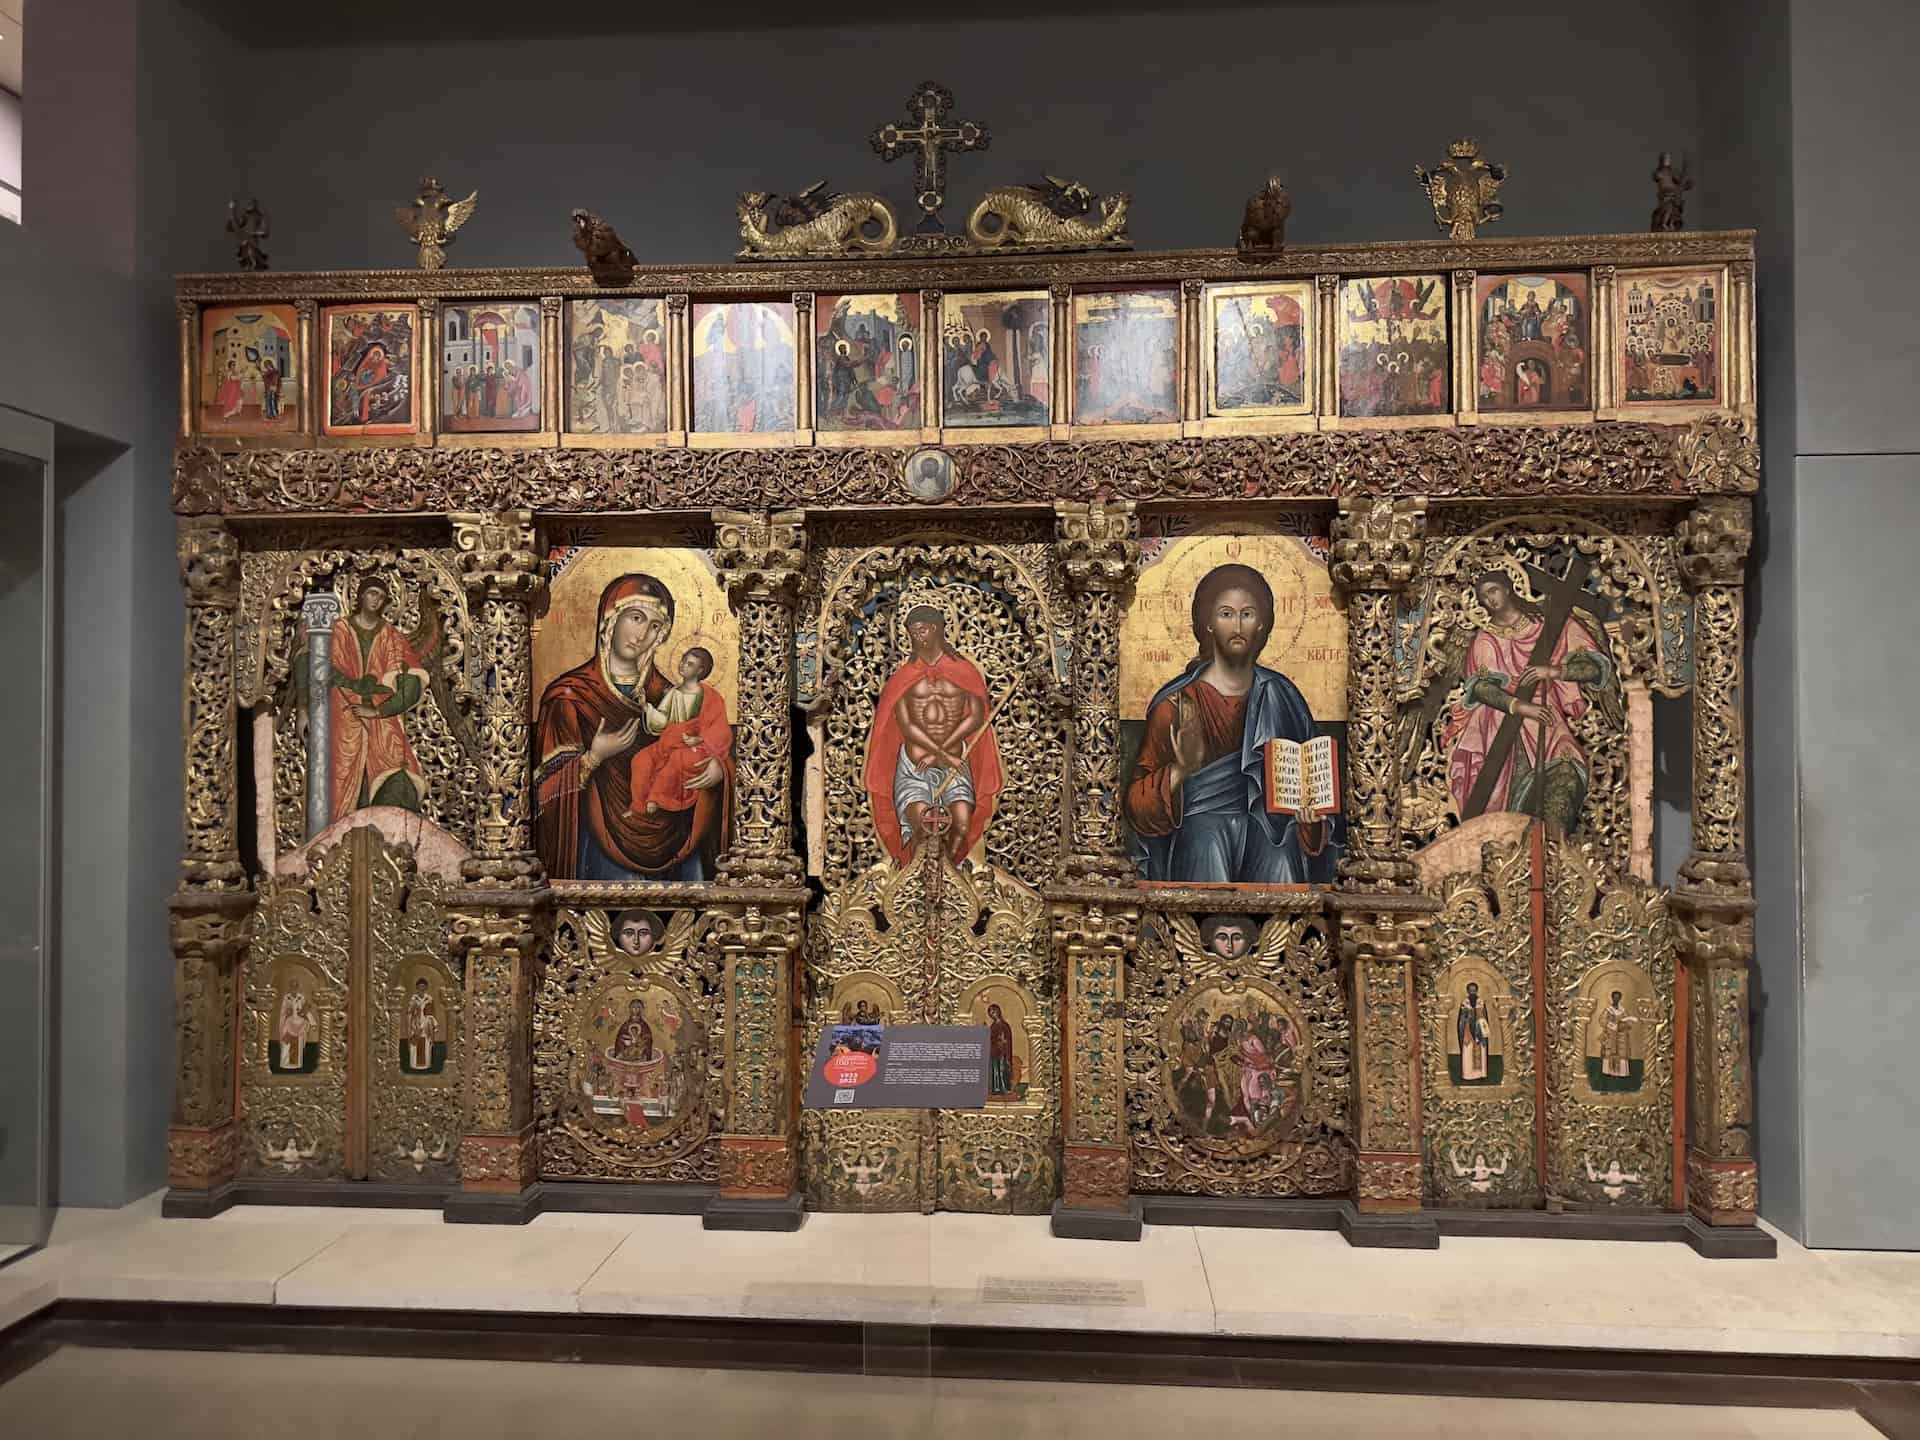 Iconostasis from an lonian Islands church, late 17th-early 18th century at the Byzantine Museum in Athens, Greece